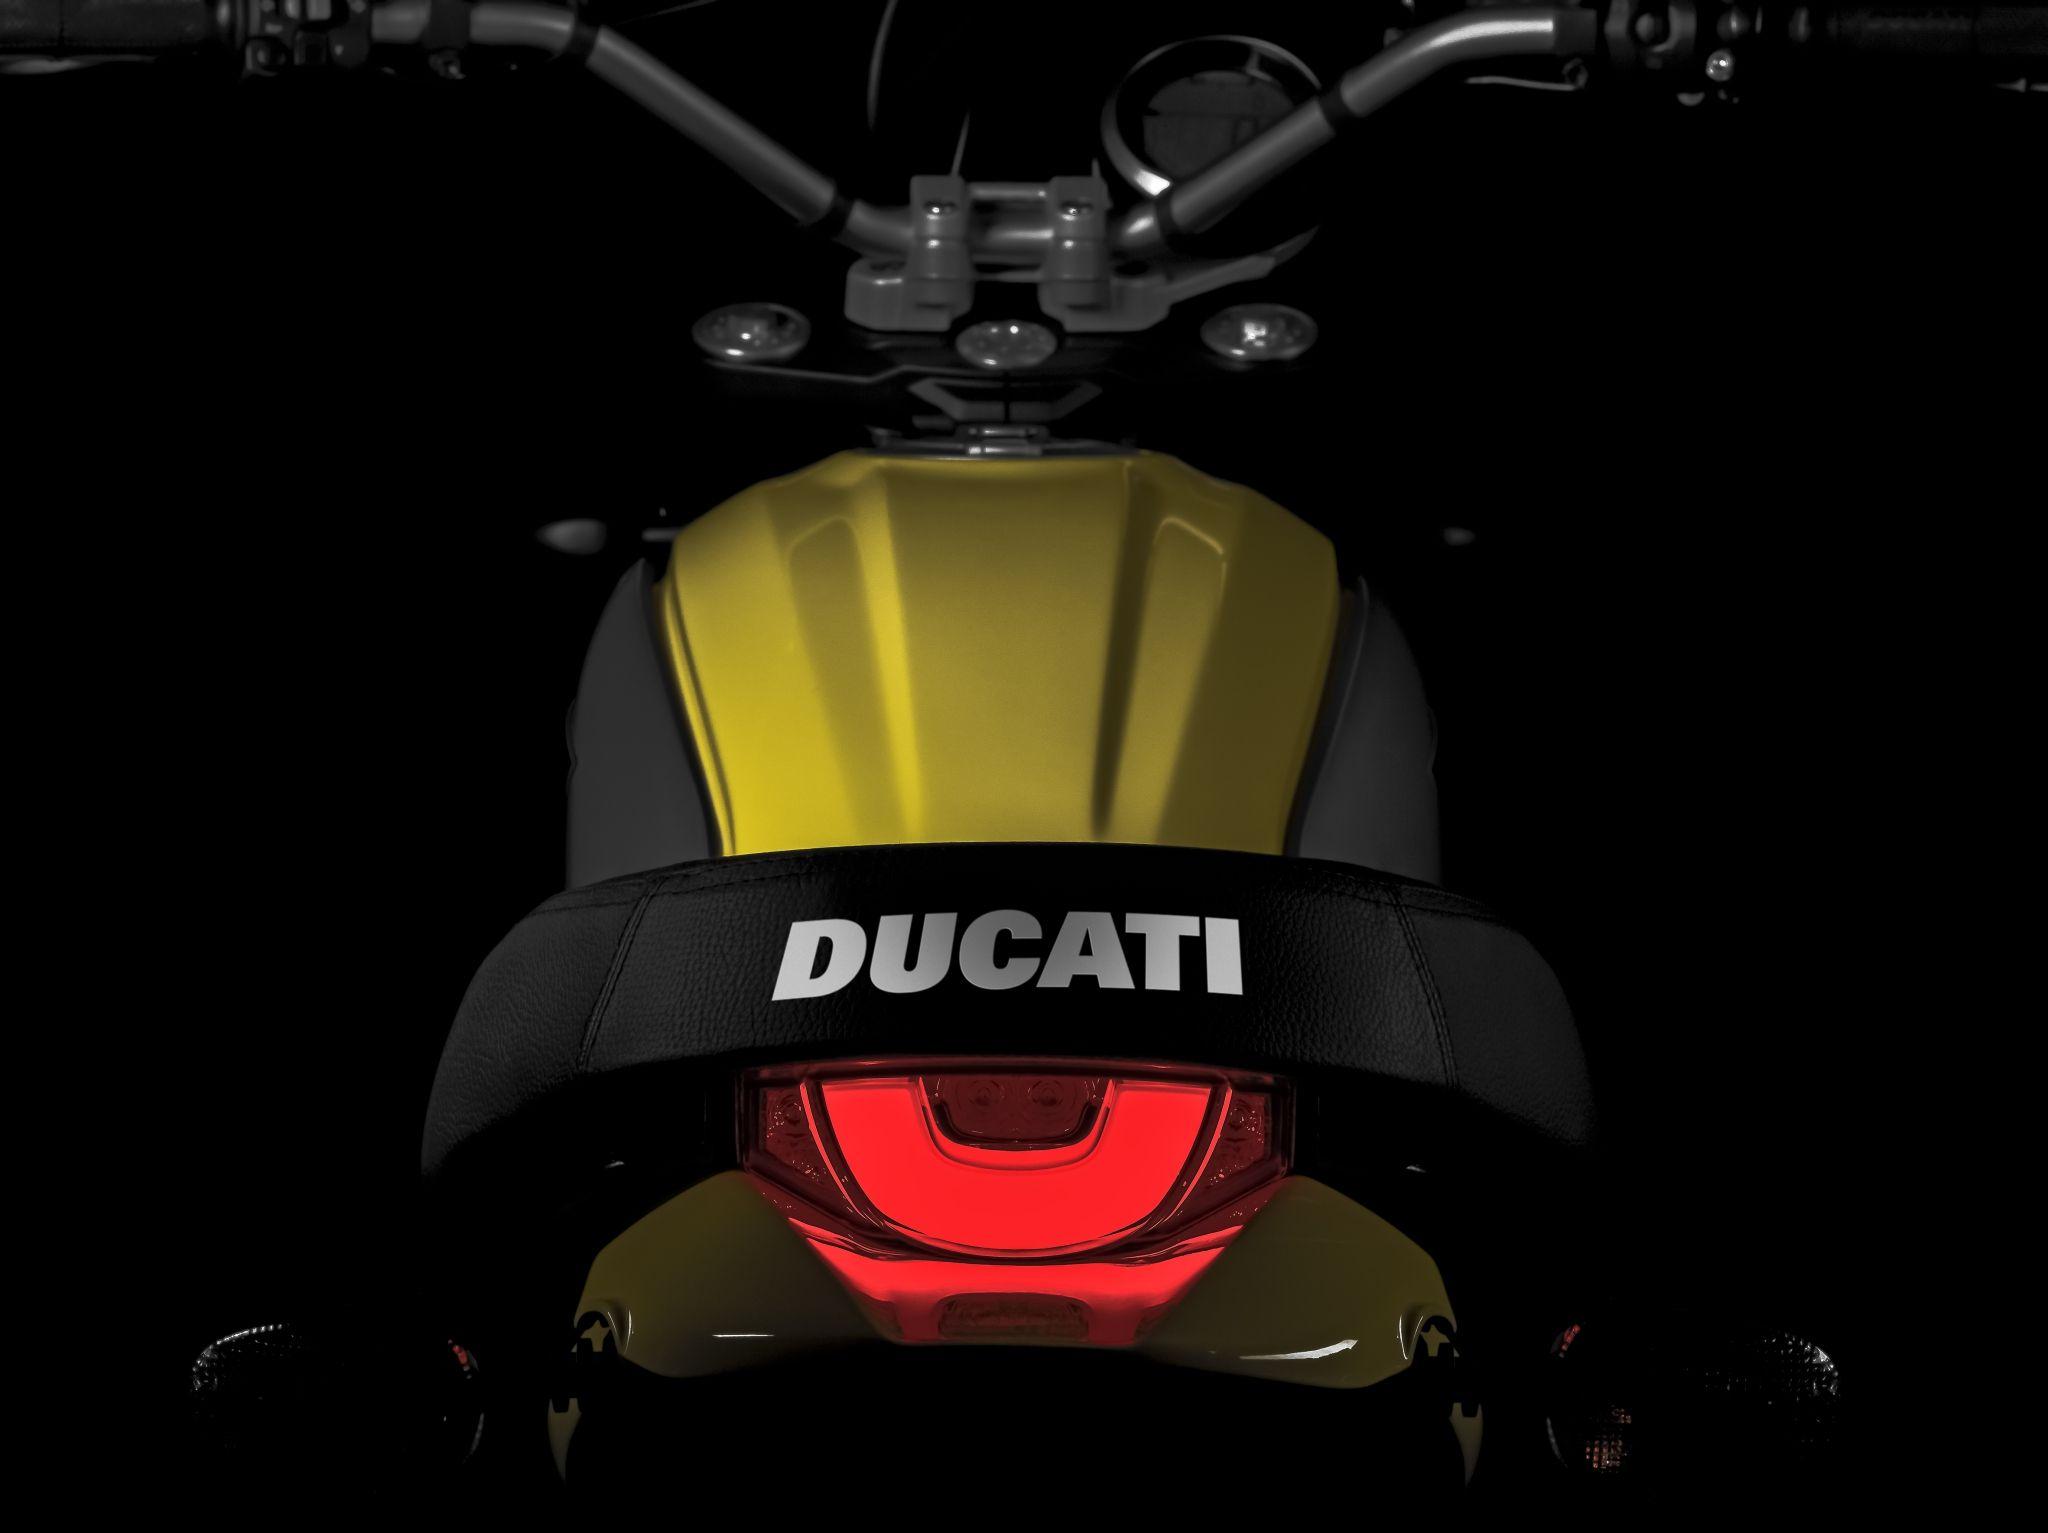 Pics of the 2015 Ducati Scrambler and It Doesn't Look Bad at